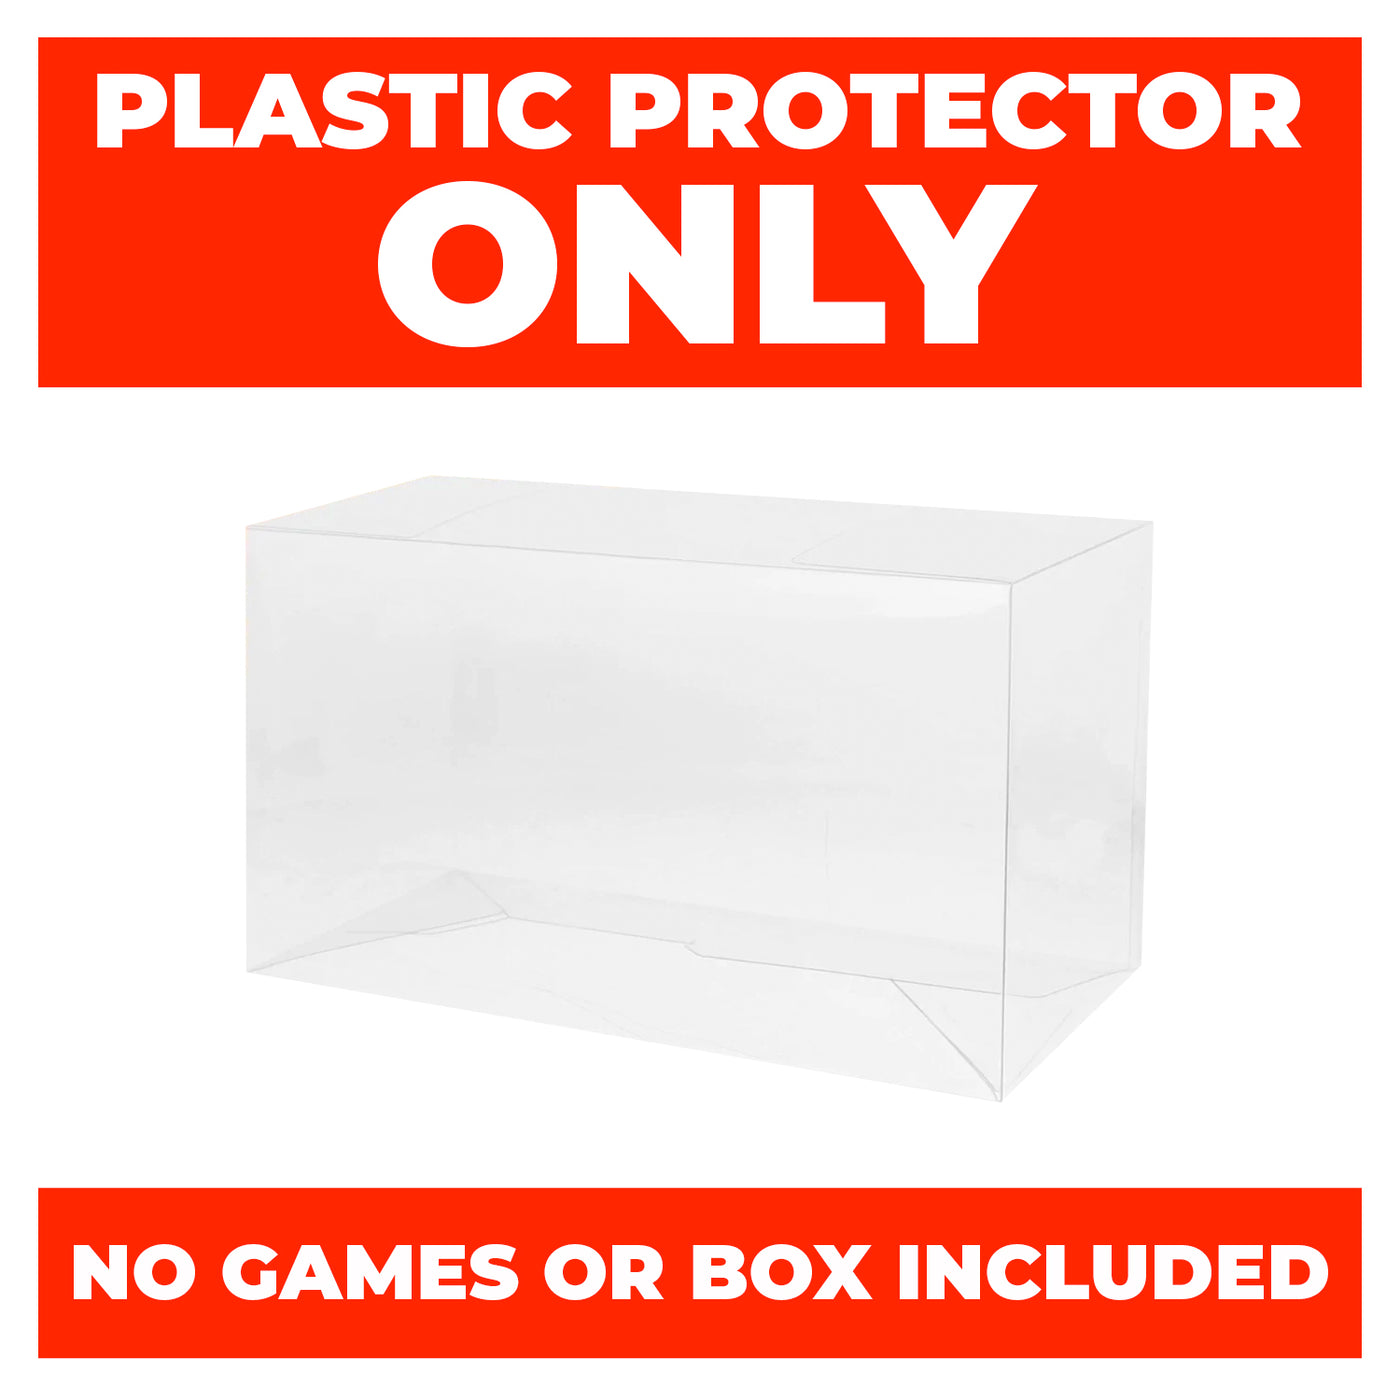 Box Protectors for video games PS2 Gamecube Xbox Wii DVD Game Boxes 0.50mm thick UV Scratch Resistant display geek